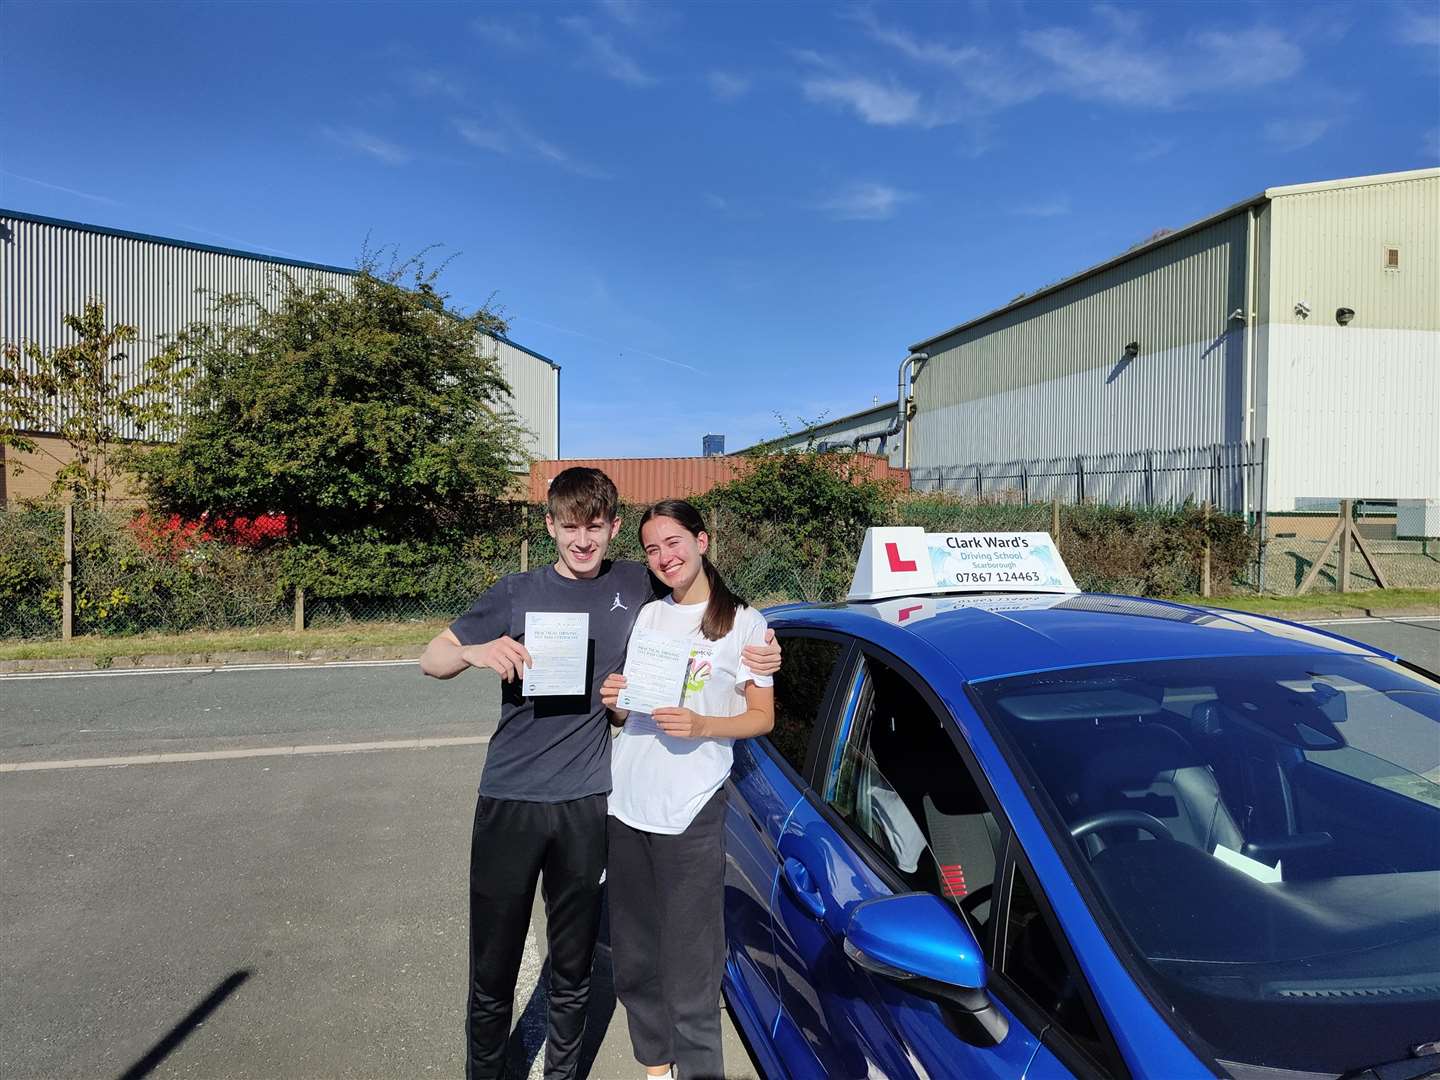 Twins Alfie and Emma Willis passed their driving tests at the same time (Clark Ward Driving School/PA)